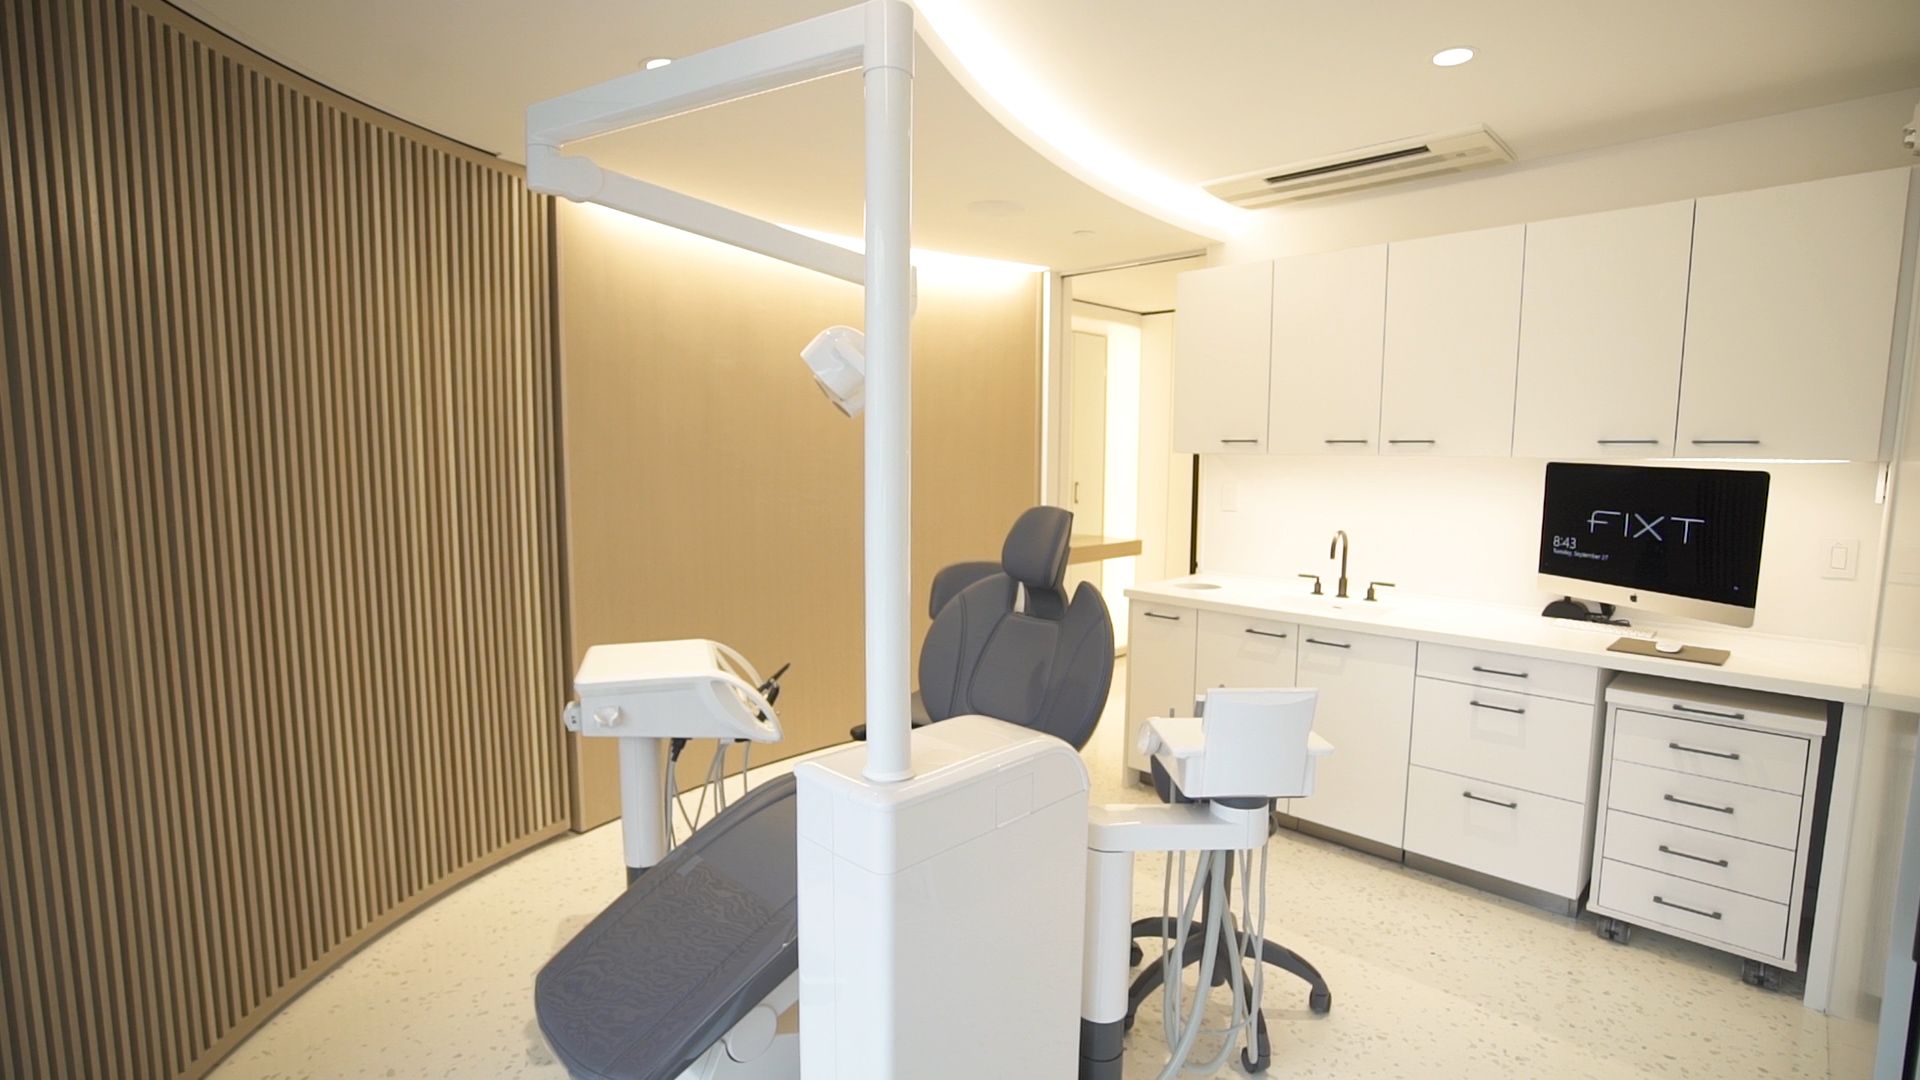 General Dentists in Wellesley, MA: Cleanings, Crowns, Extractions